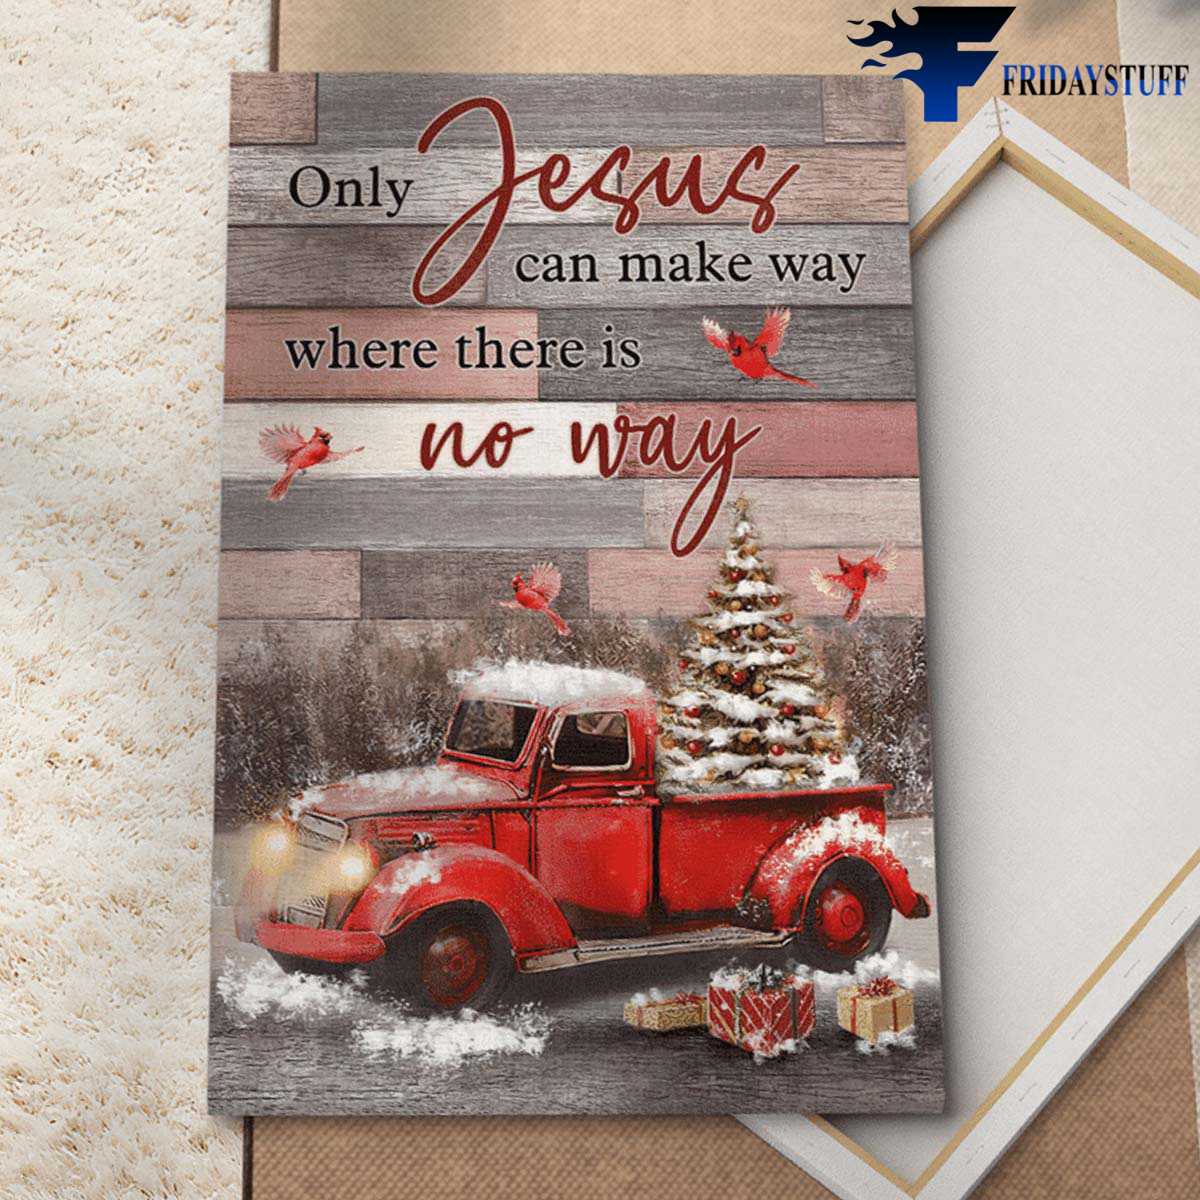 Christmas Poster, Christmas Truck, Cardinal Bird, Only Jesus Can Make Way, Where There Is No Way